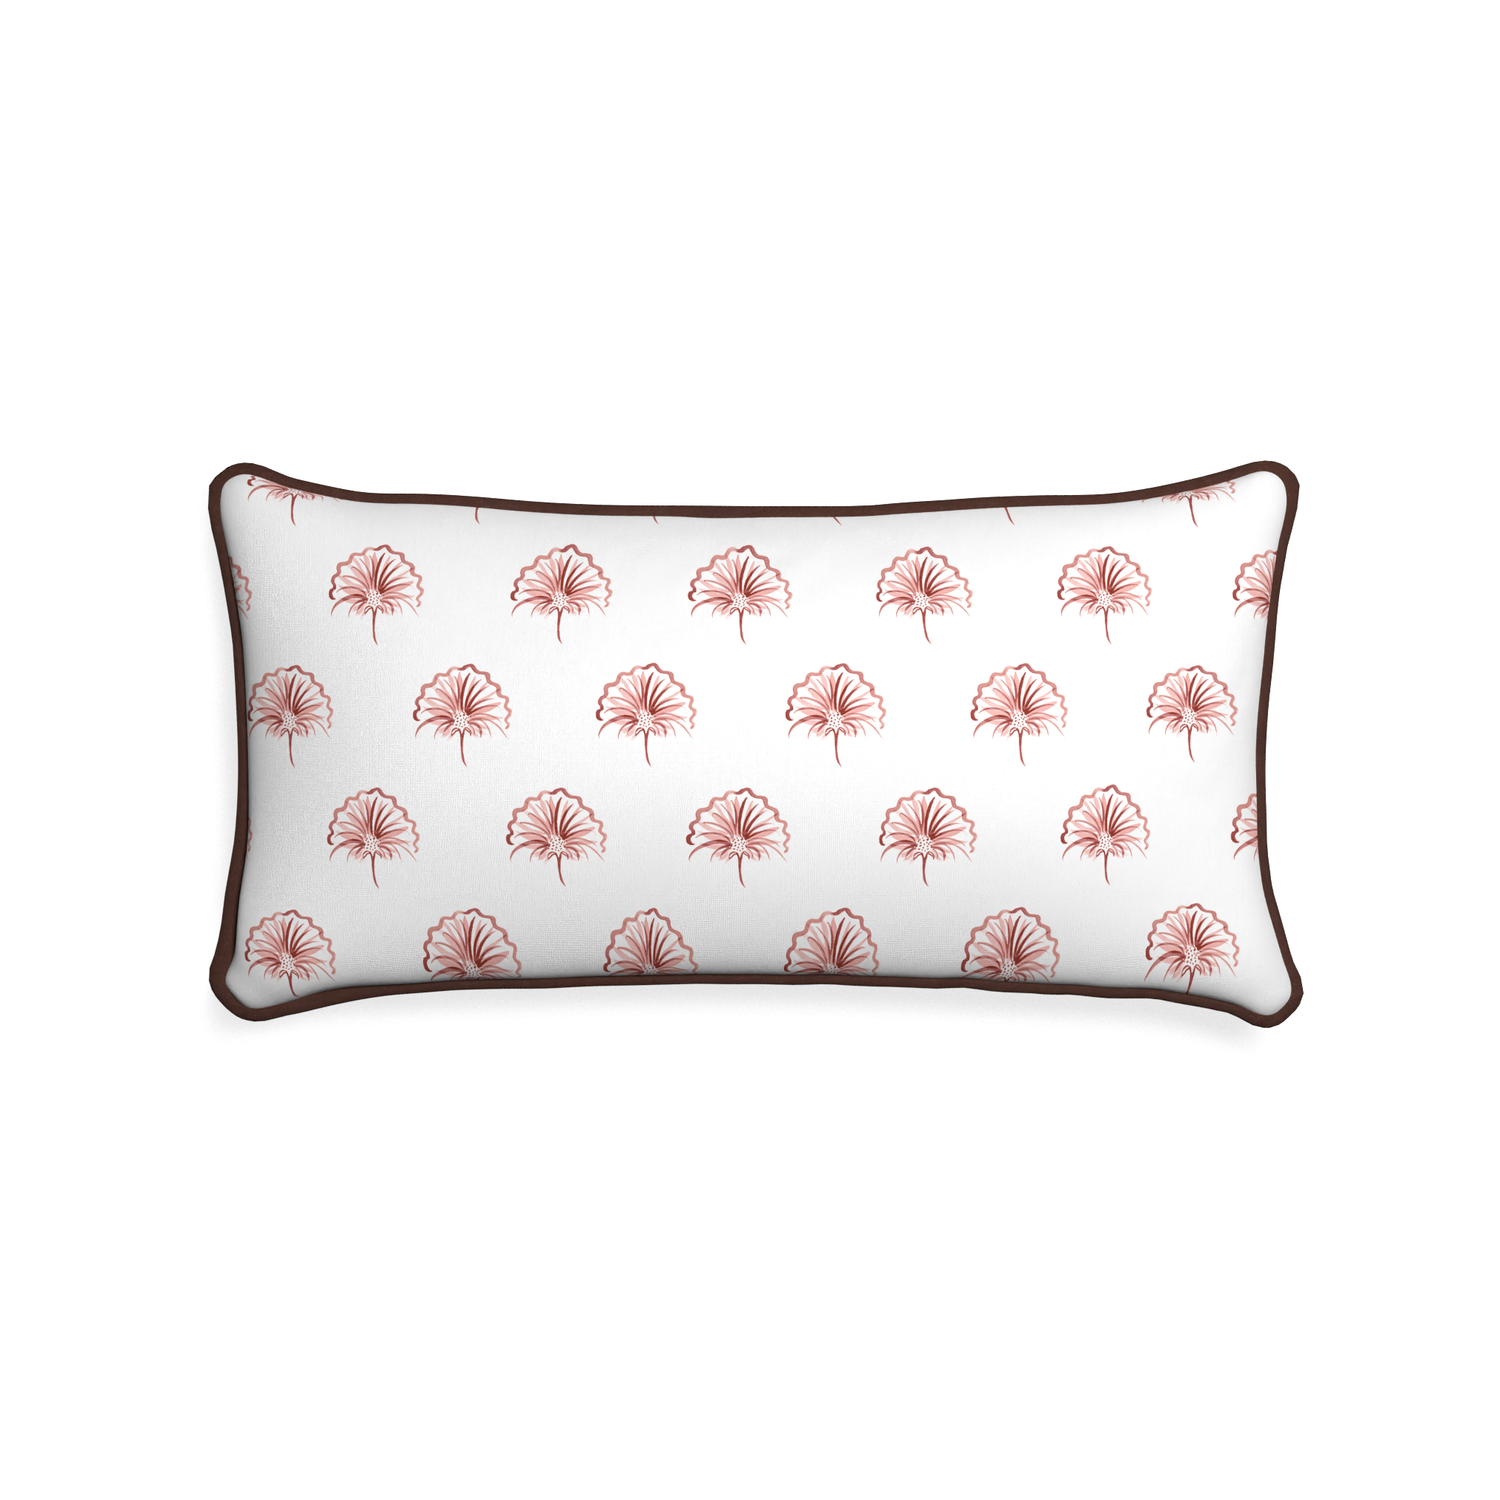 Midi-lumbar penelope rose custom floral pinkpillow with w piping on white background